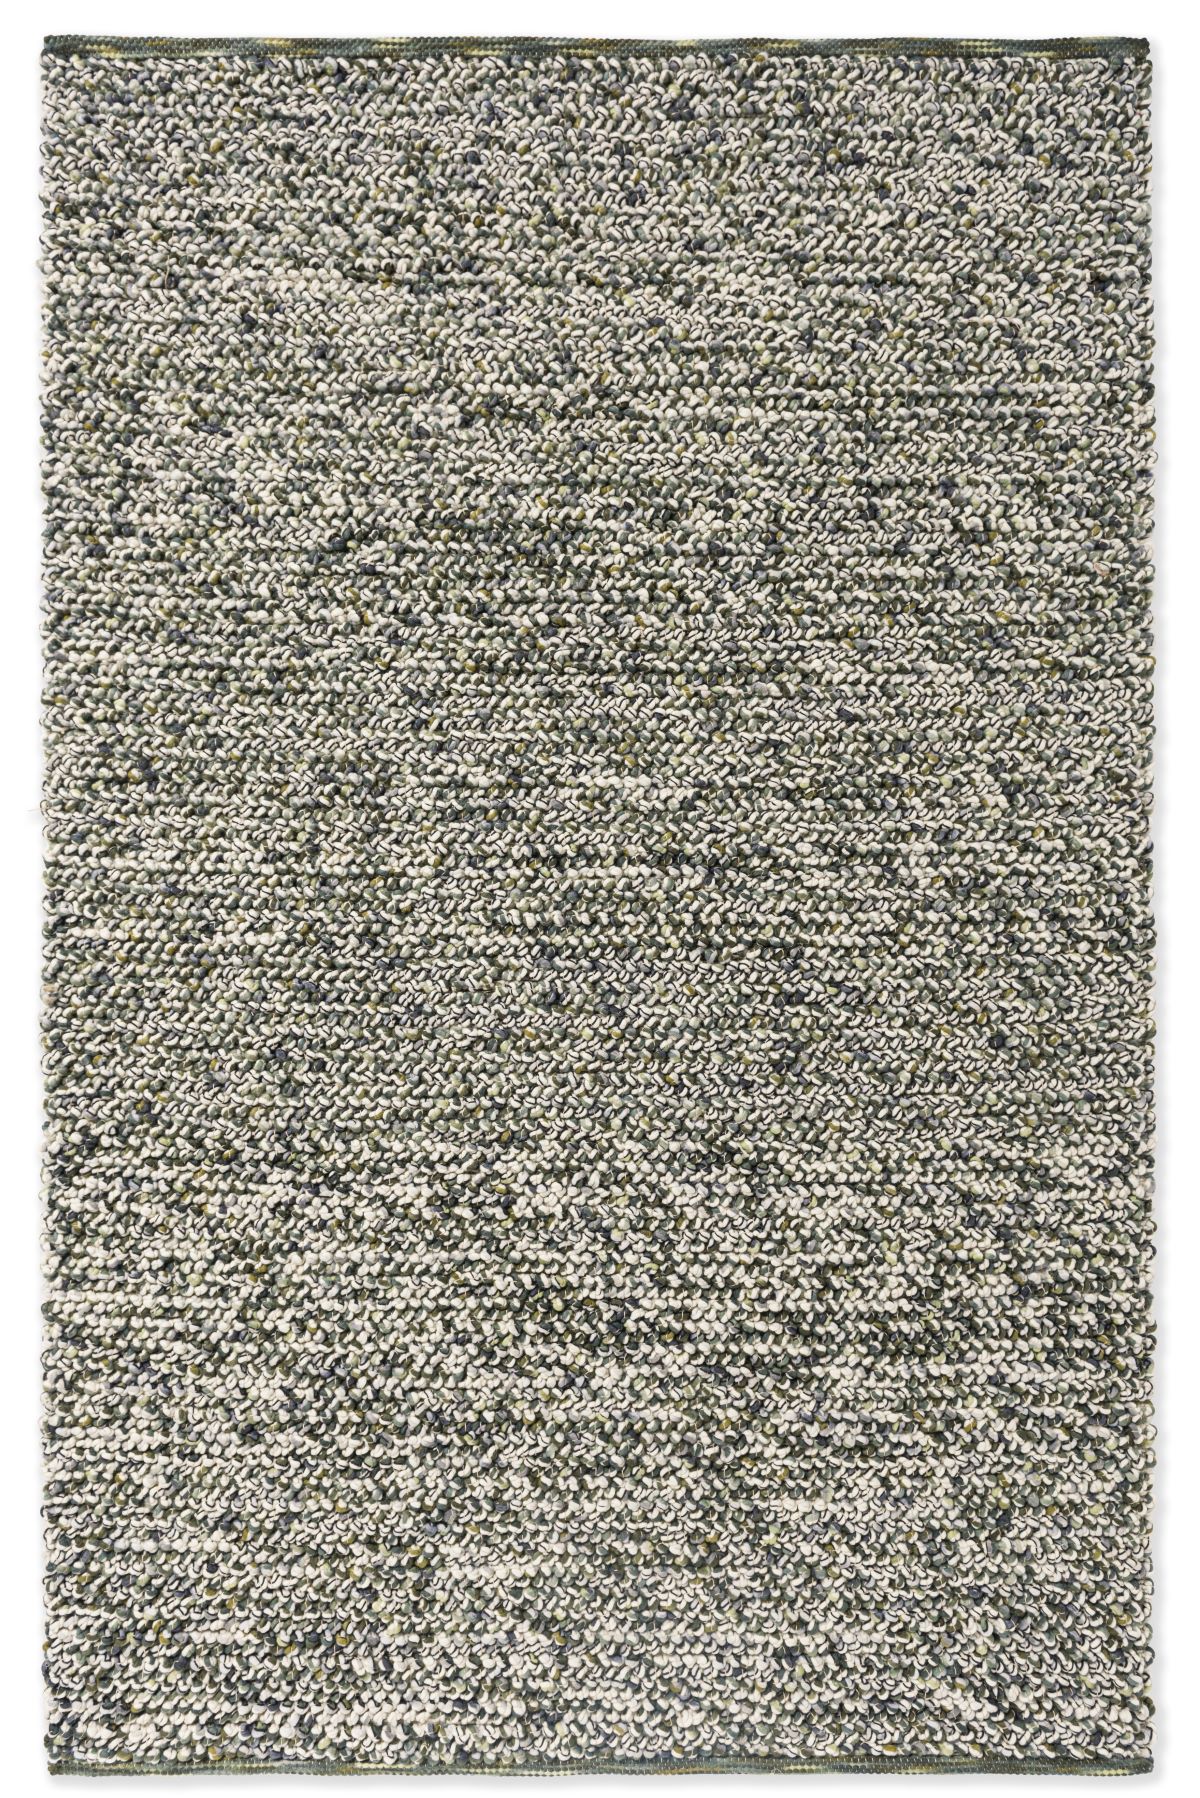 brink-and-campman-rug-marble-pine-forest-029547